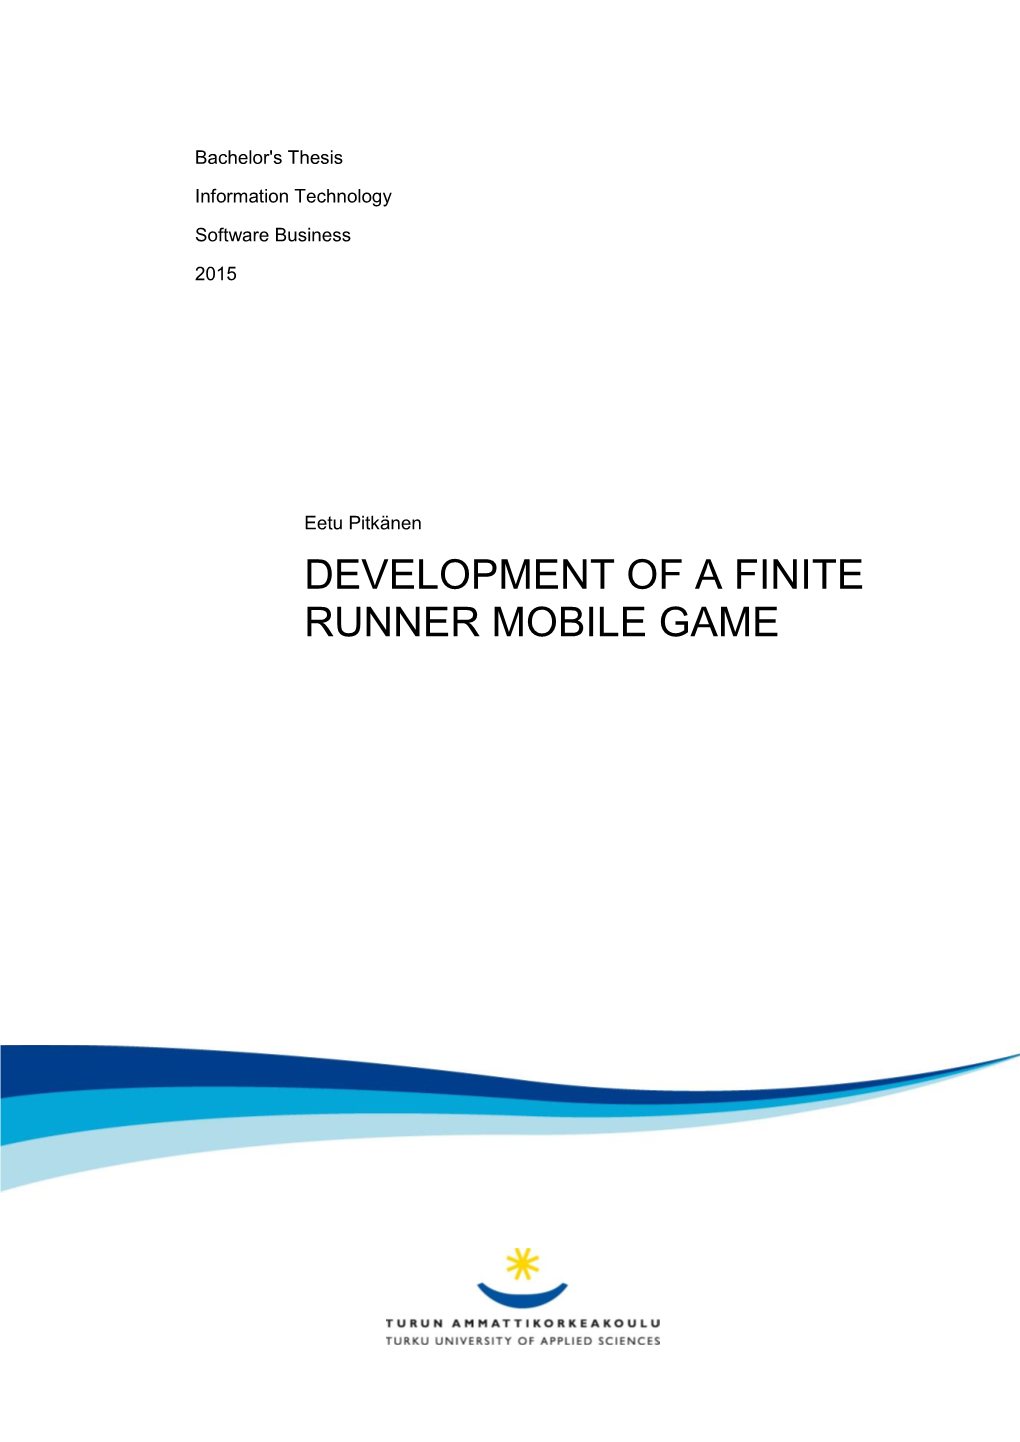 Development of a Finite Runner Mobile Game Bachelor's Thesis | Abstract